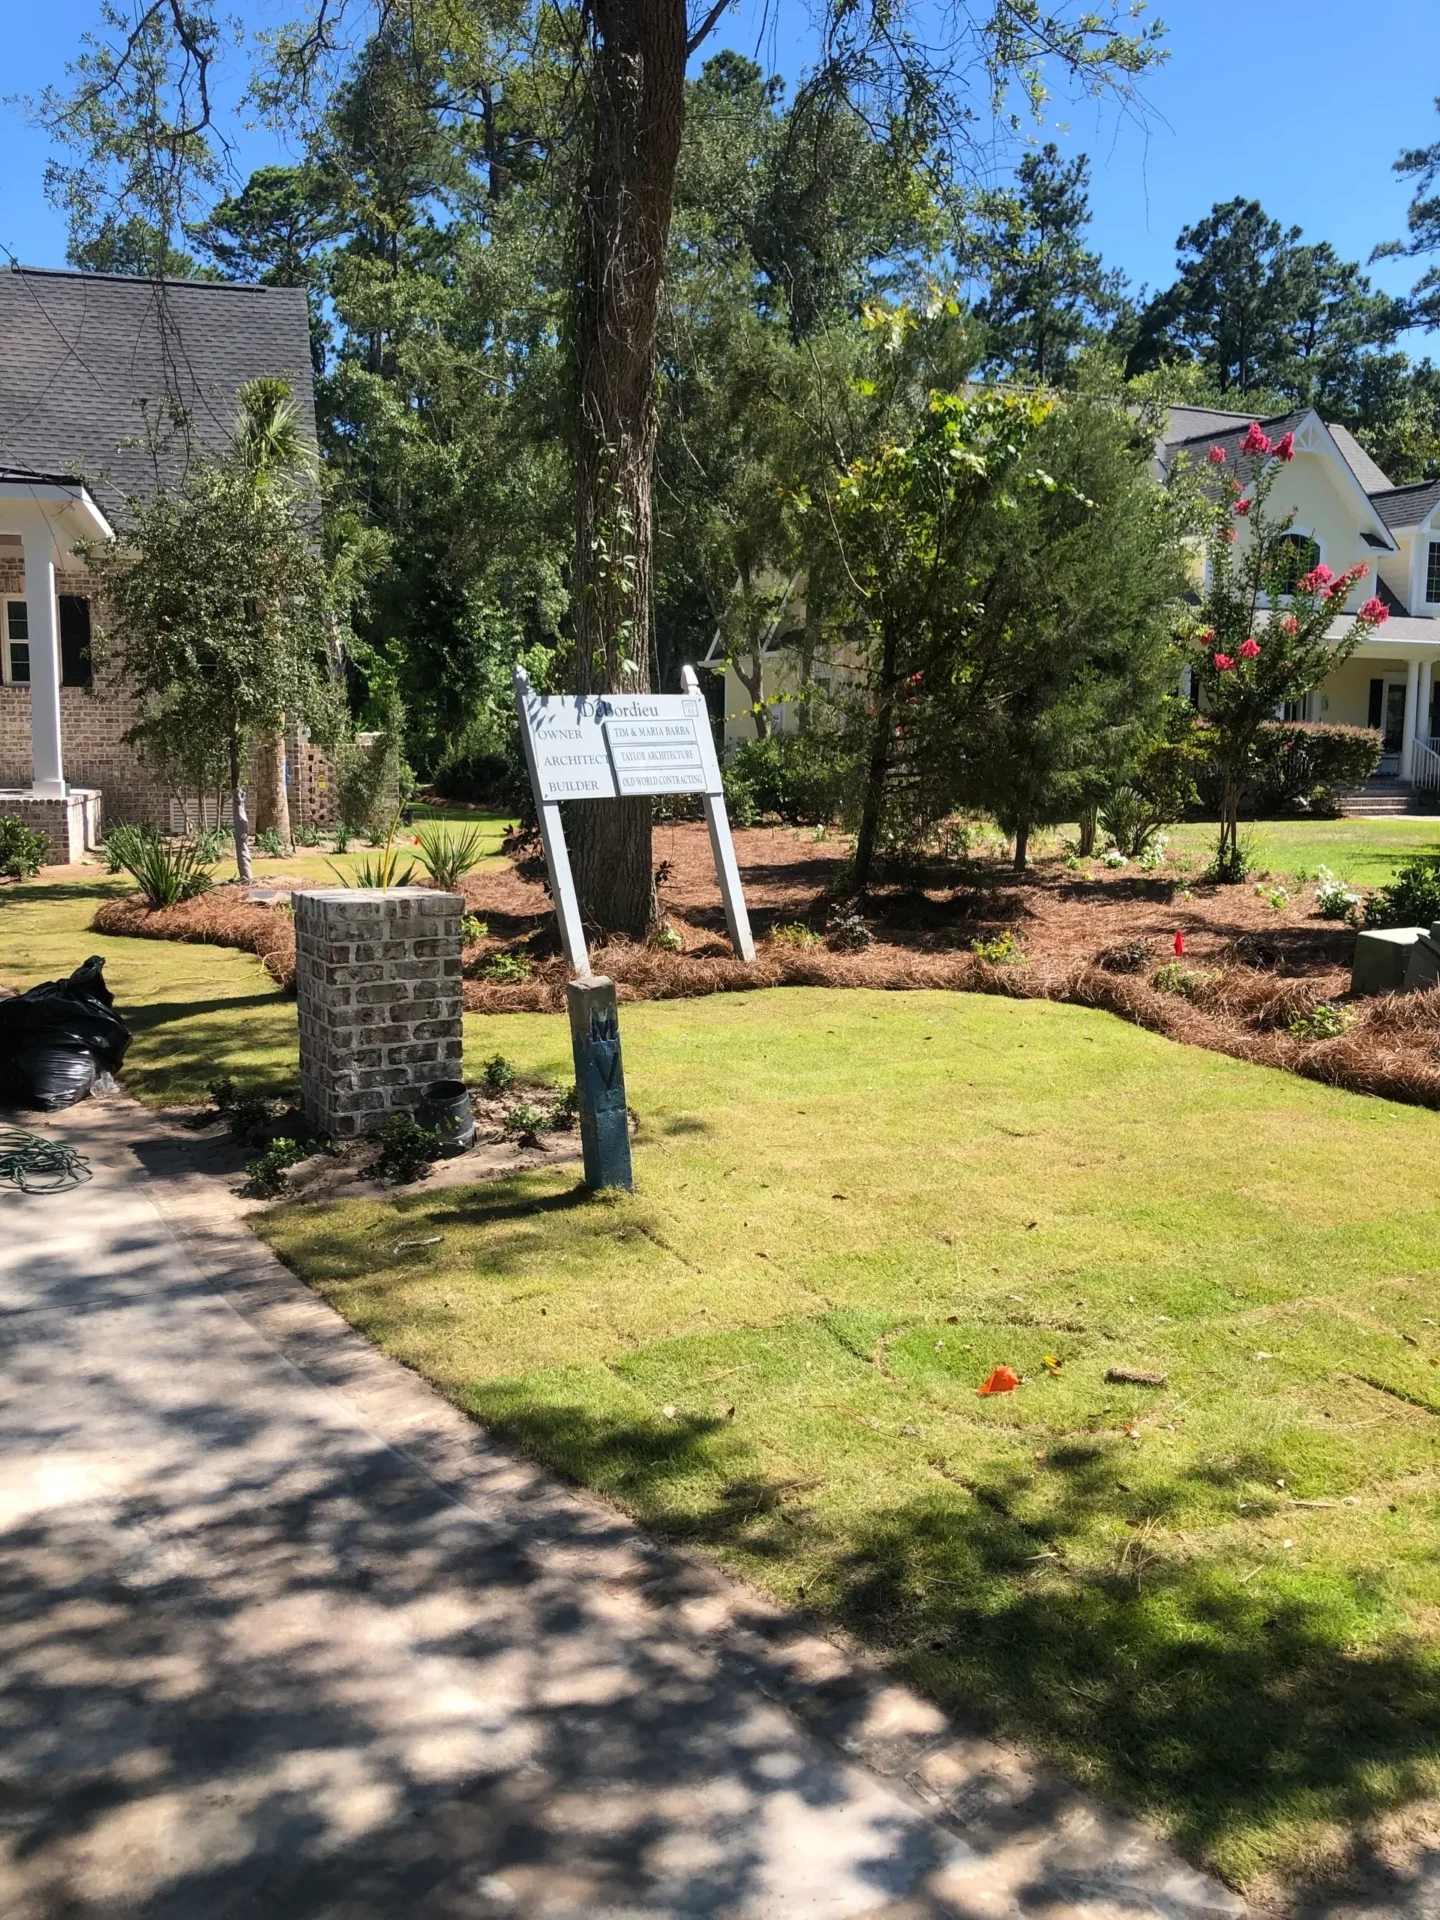 A sign in the middle of a yard with trees.